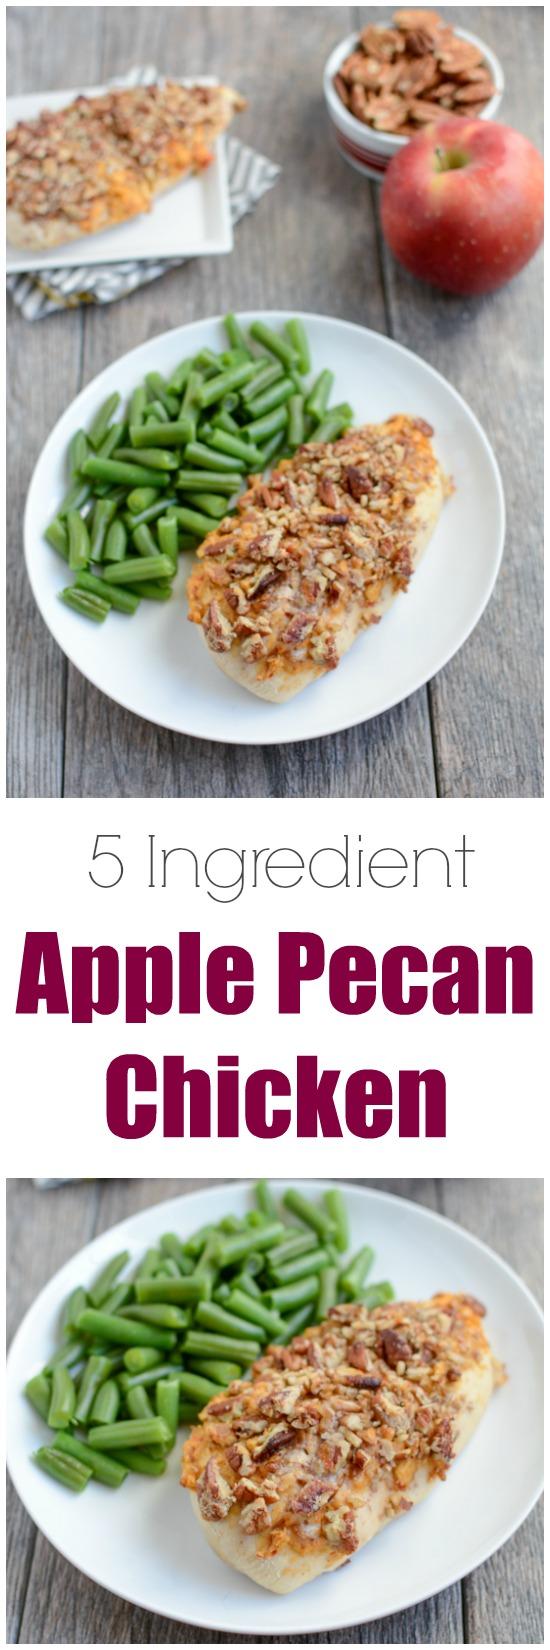 This simple recipe for Apple Pecan Chicken is made with just 5 ingredients and makes a great weeknight dinner. 